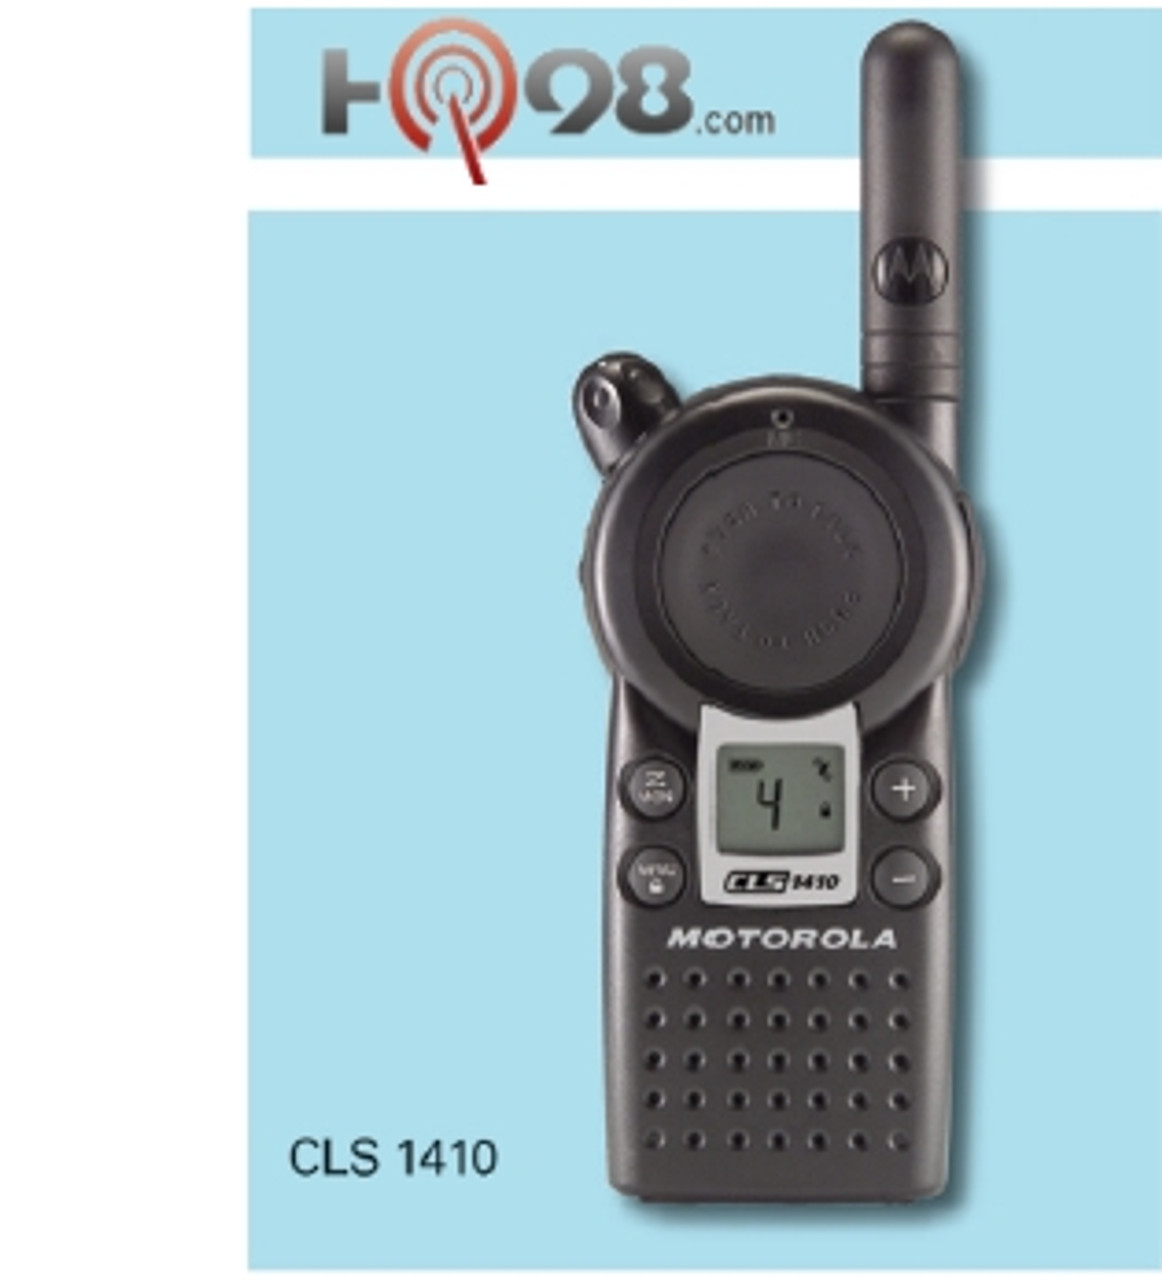 Motorola Radius CLS-1410 Way Professional Radio Walkie Talkie with  VibraCall and Scan features. Ideal for managers, security officers and  retail 723755565135